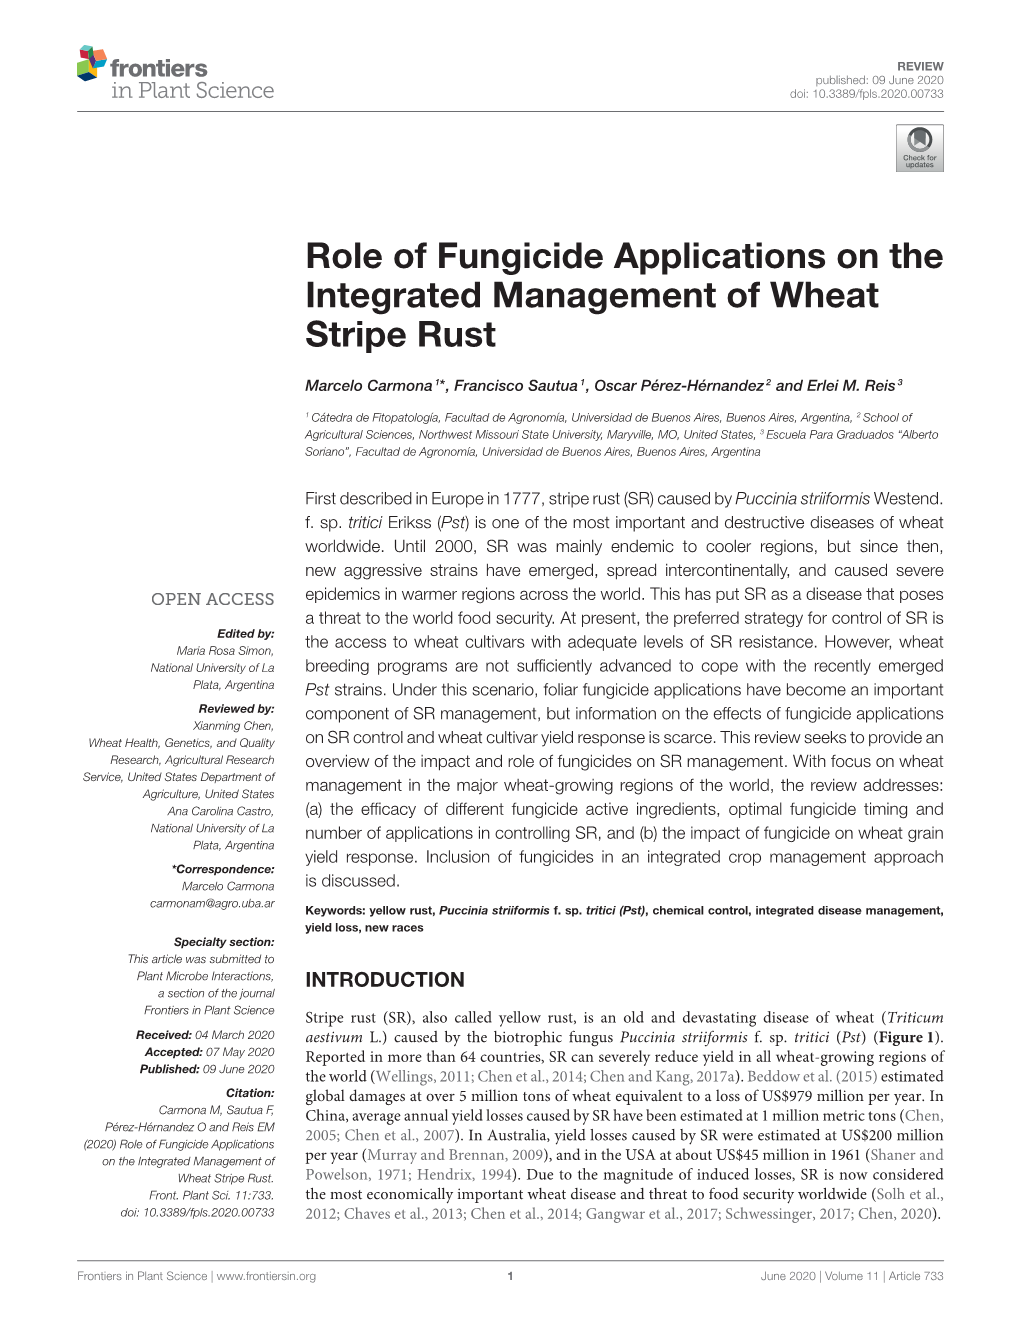 Role of Fungicide Applications on the Integrated Management of Wheat Stripe Rust